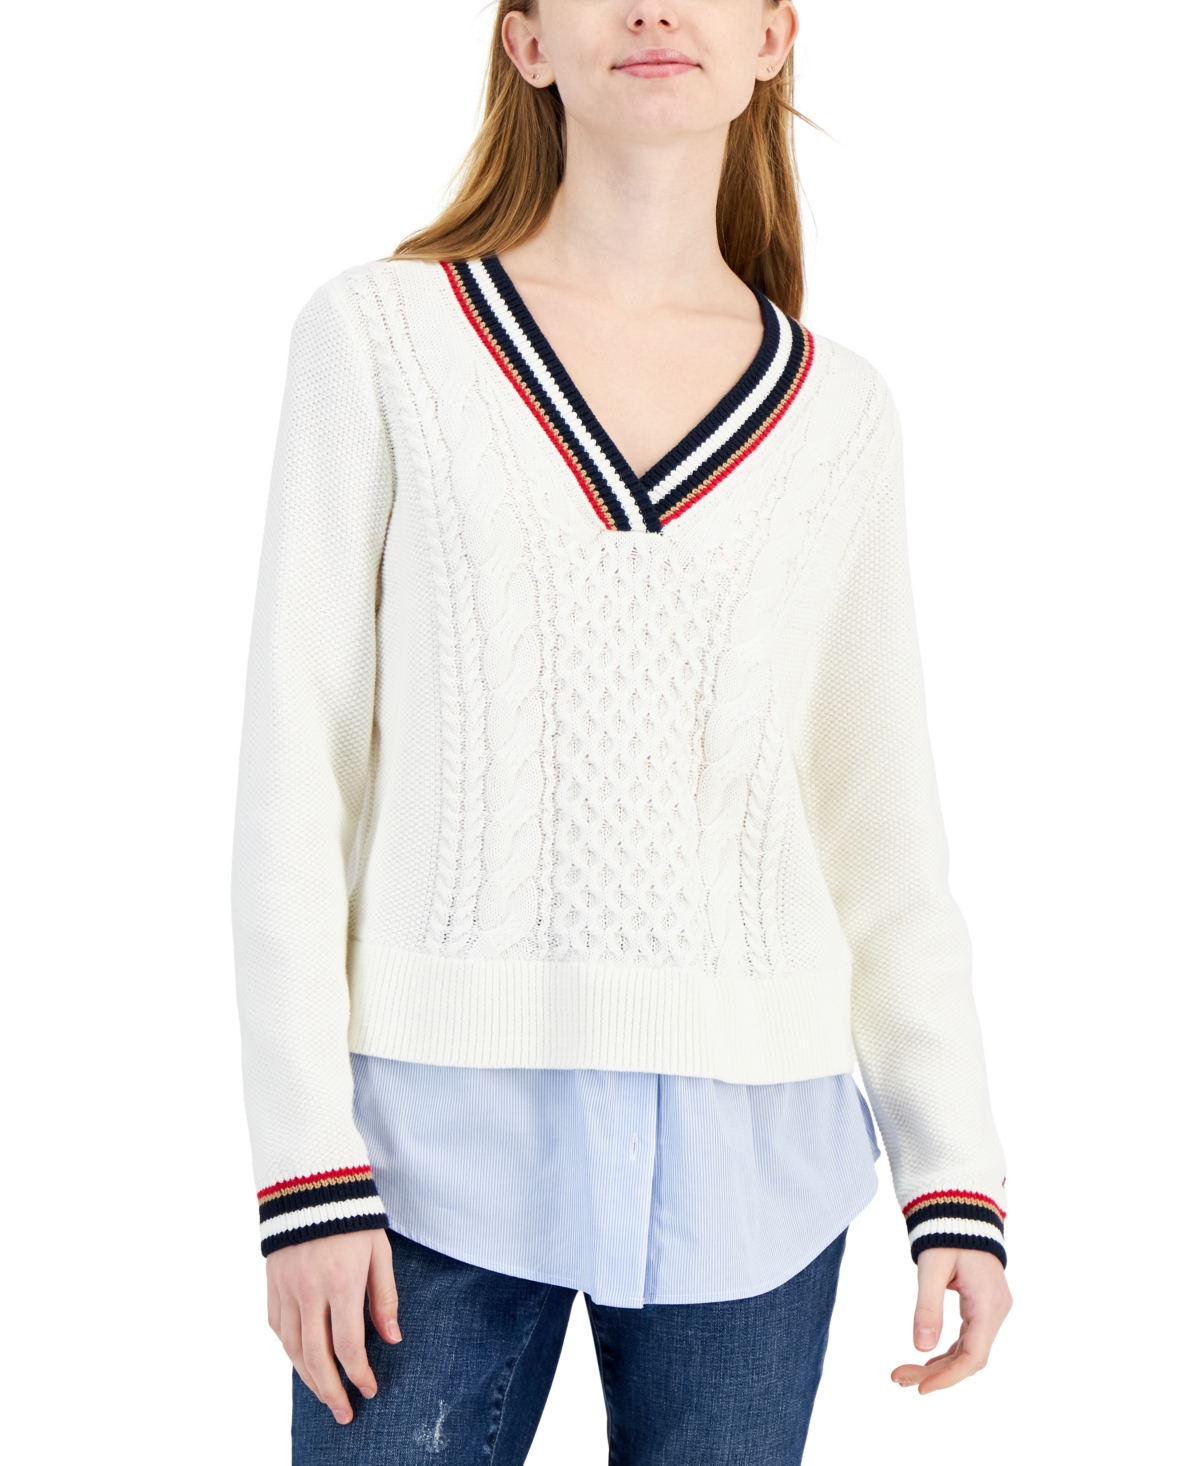 Women's Cable-Knit Layered-Look Sweater - White